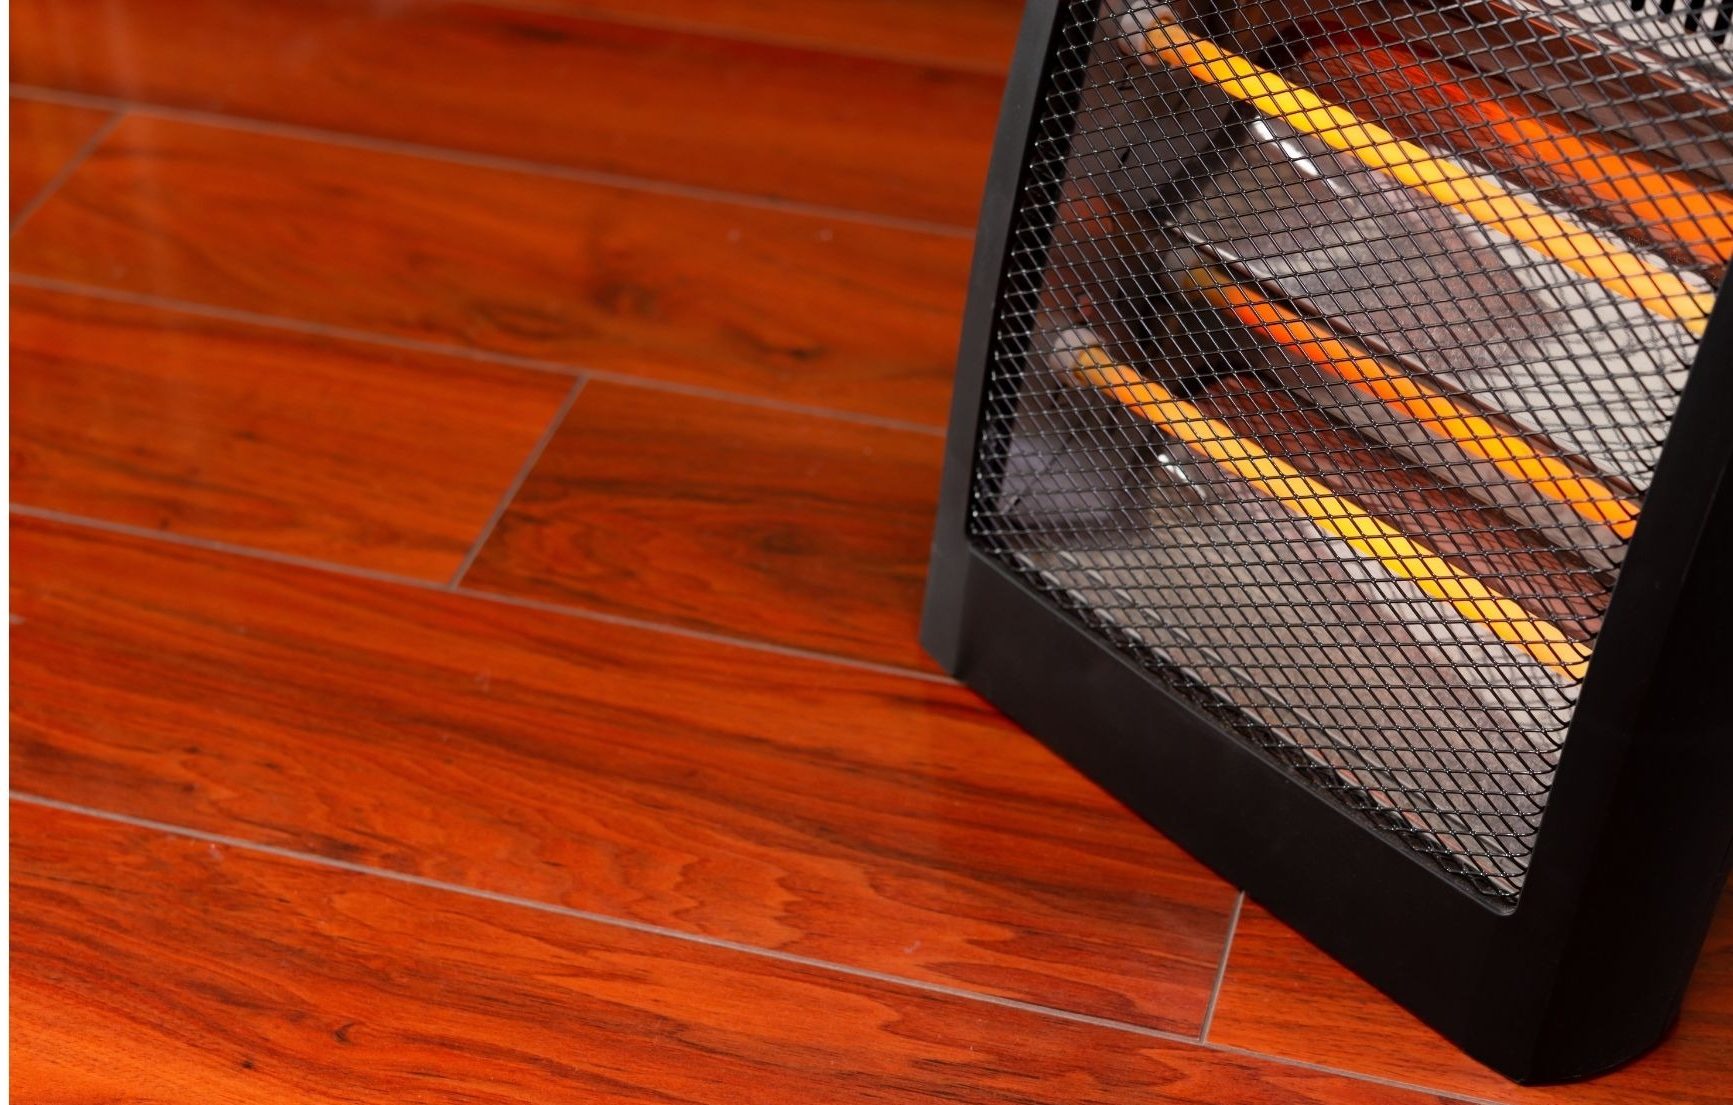 The Best Portable Space Heater? (Our Best 2 Recommendations)